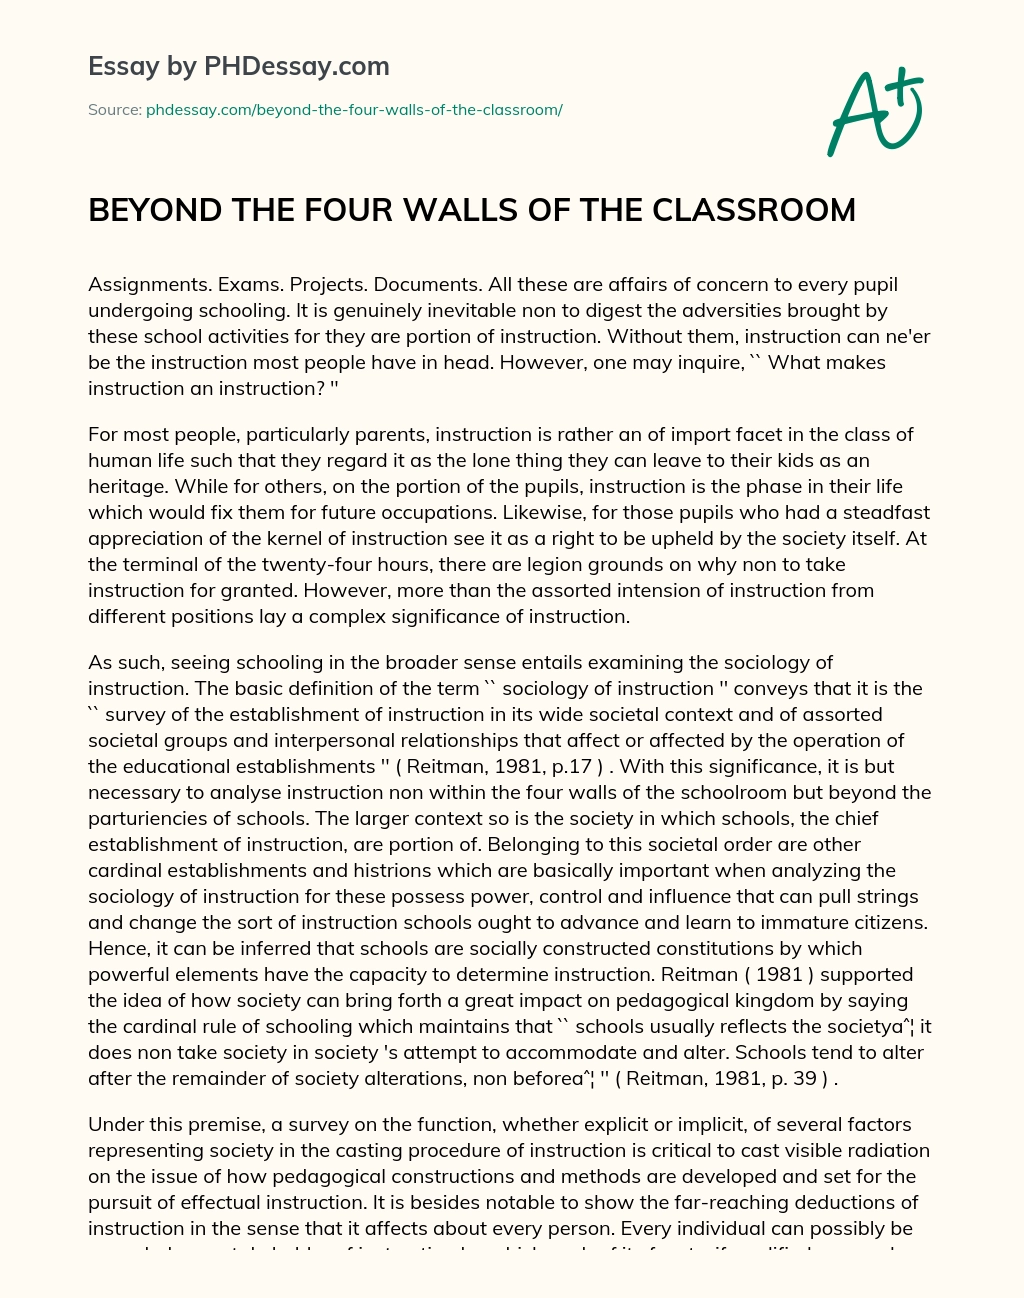 Beyond the four walls of the classroom essay